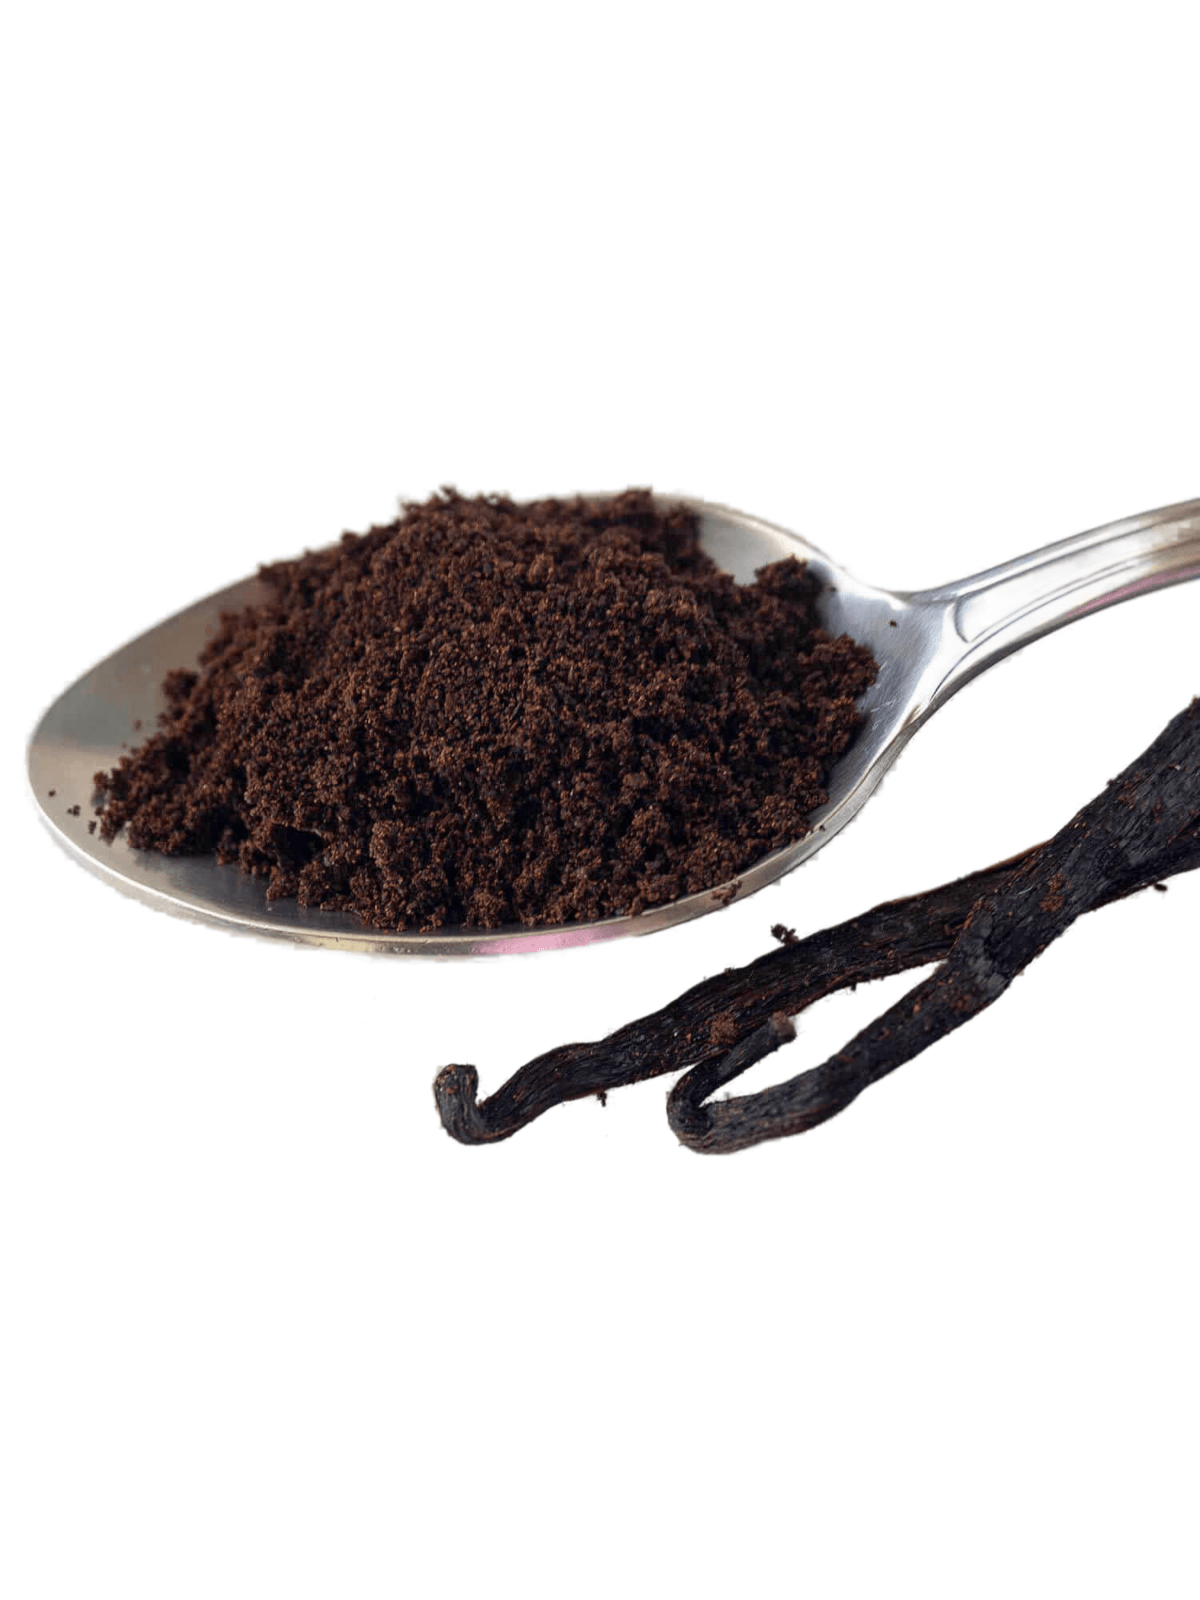 Co-op Pricing Ugandan Gourmet Ground Vanilla Bean Powder (Per Ounce)<br><br>Minimum Order quantity for this Co-op price is 2 ounces